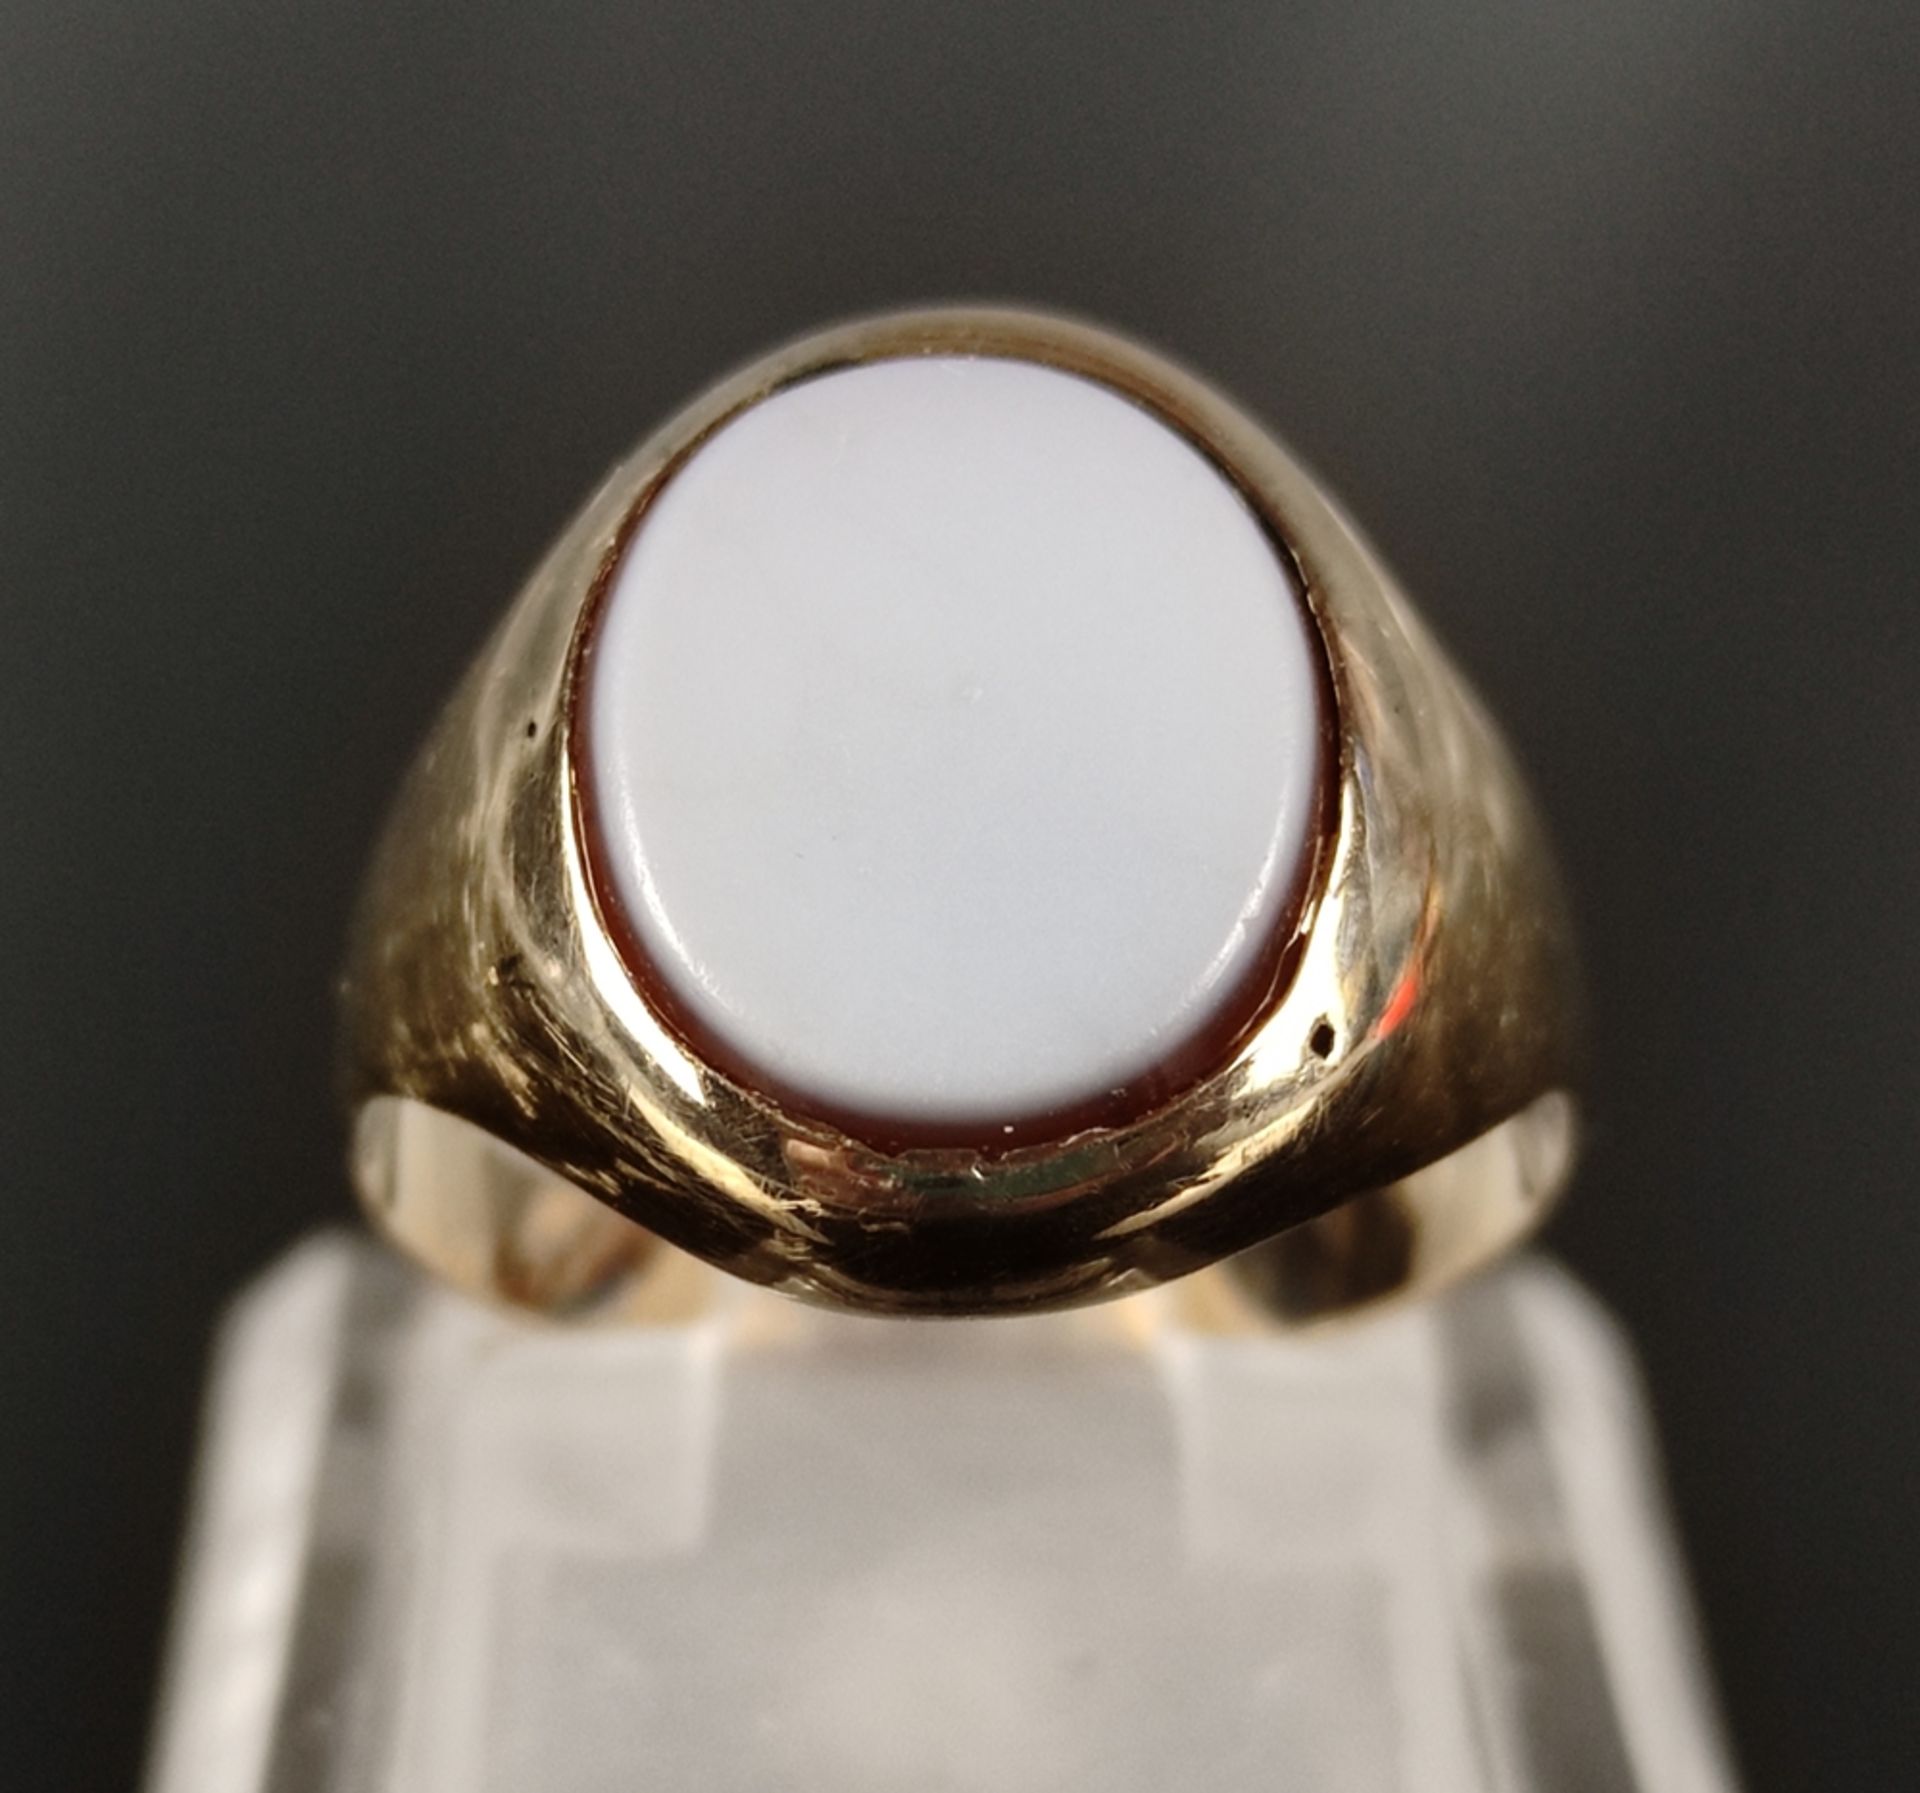 Soldier's ring with carnelian, front light blue design, early 20th century, 333/8K yellow gold, - Image 2 of 2